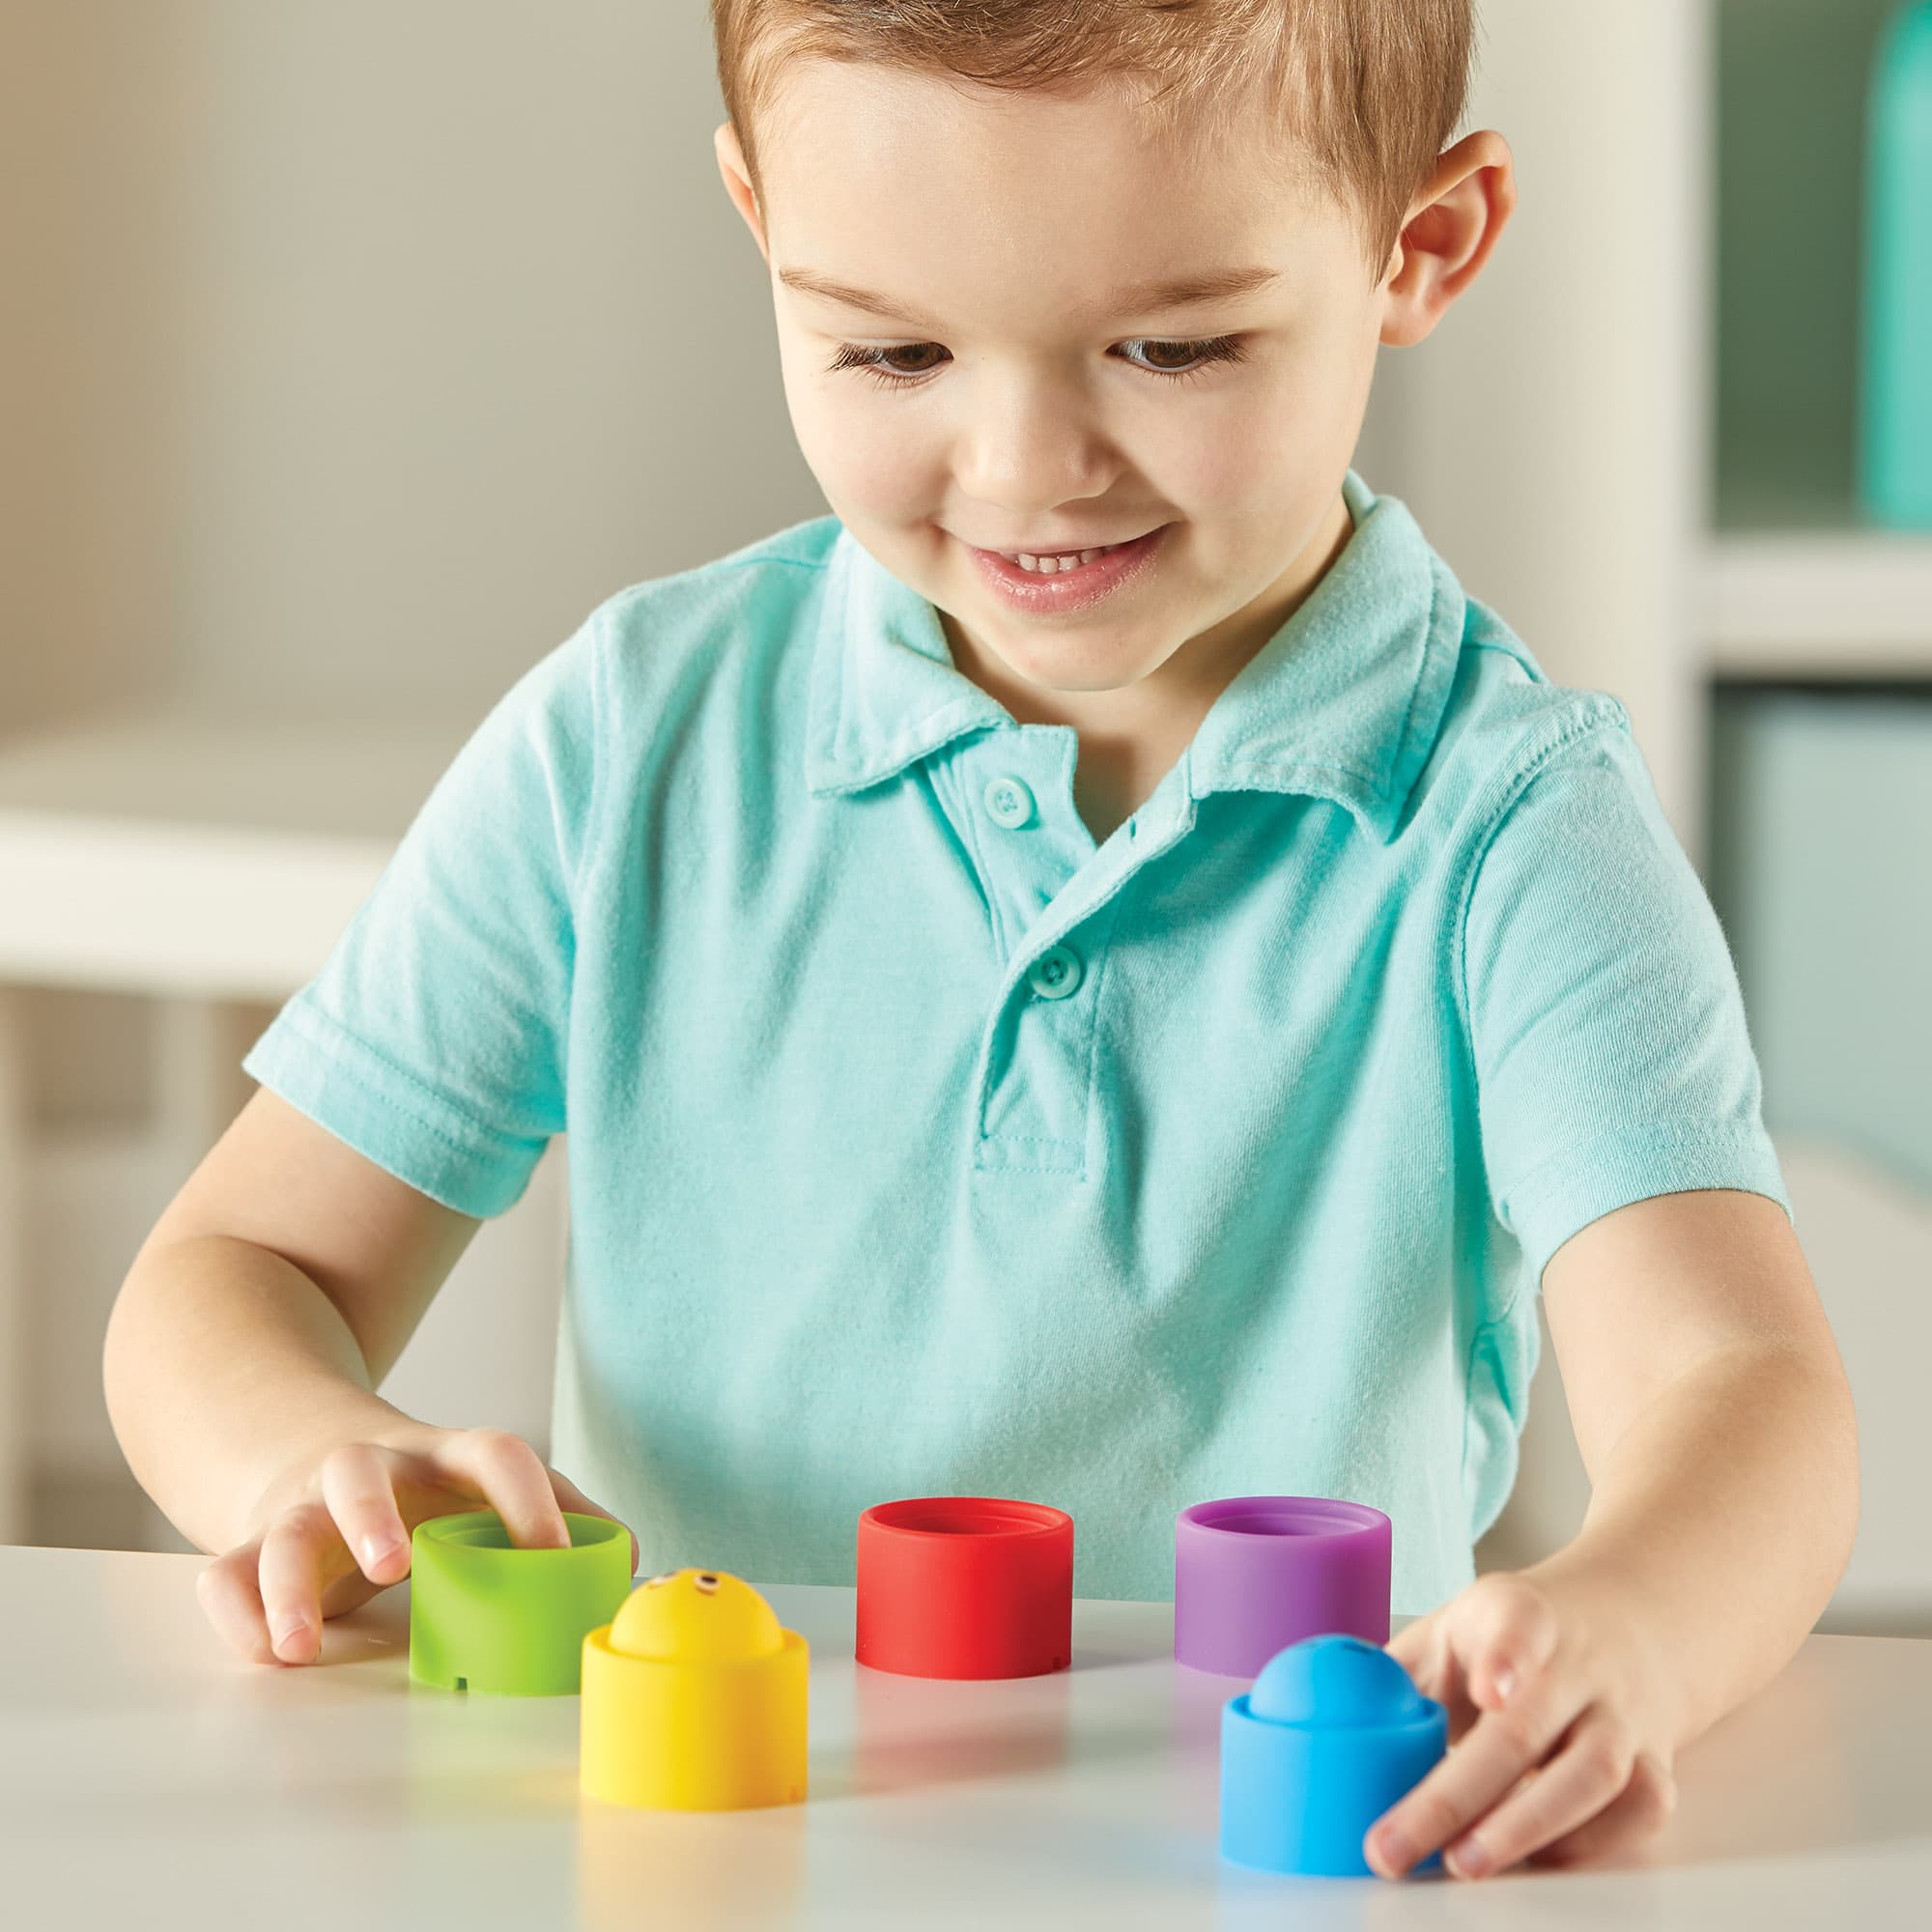 Learning Resources Rainbow Emotion Poppers